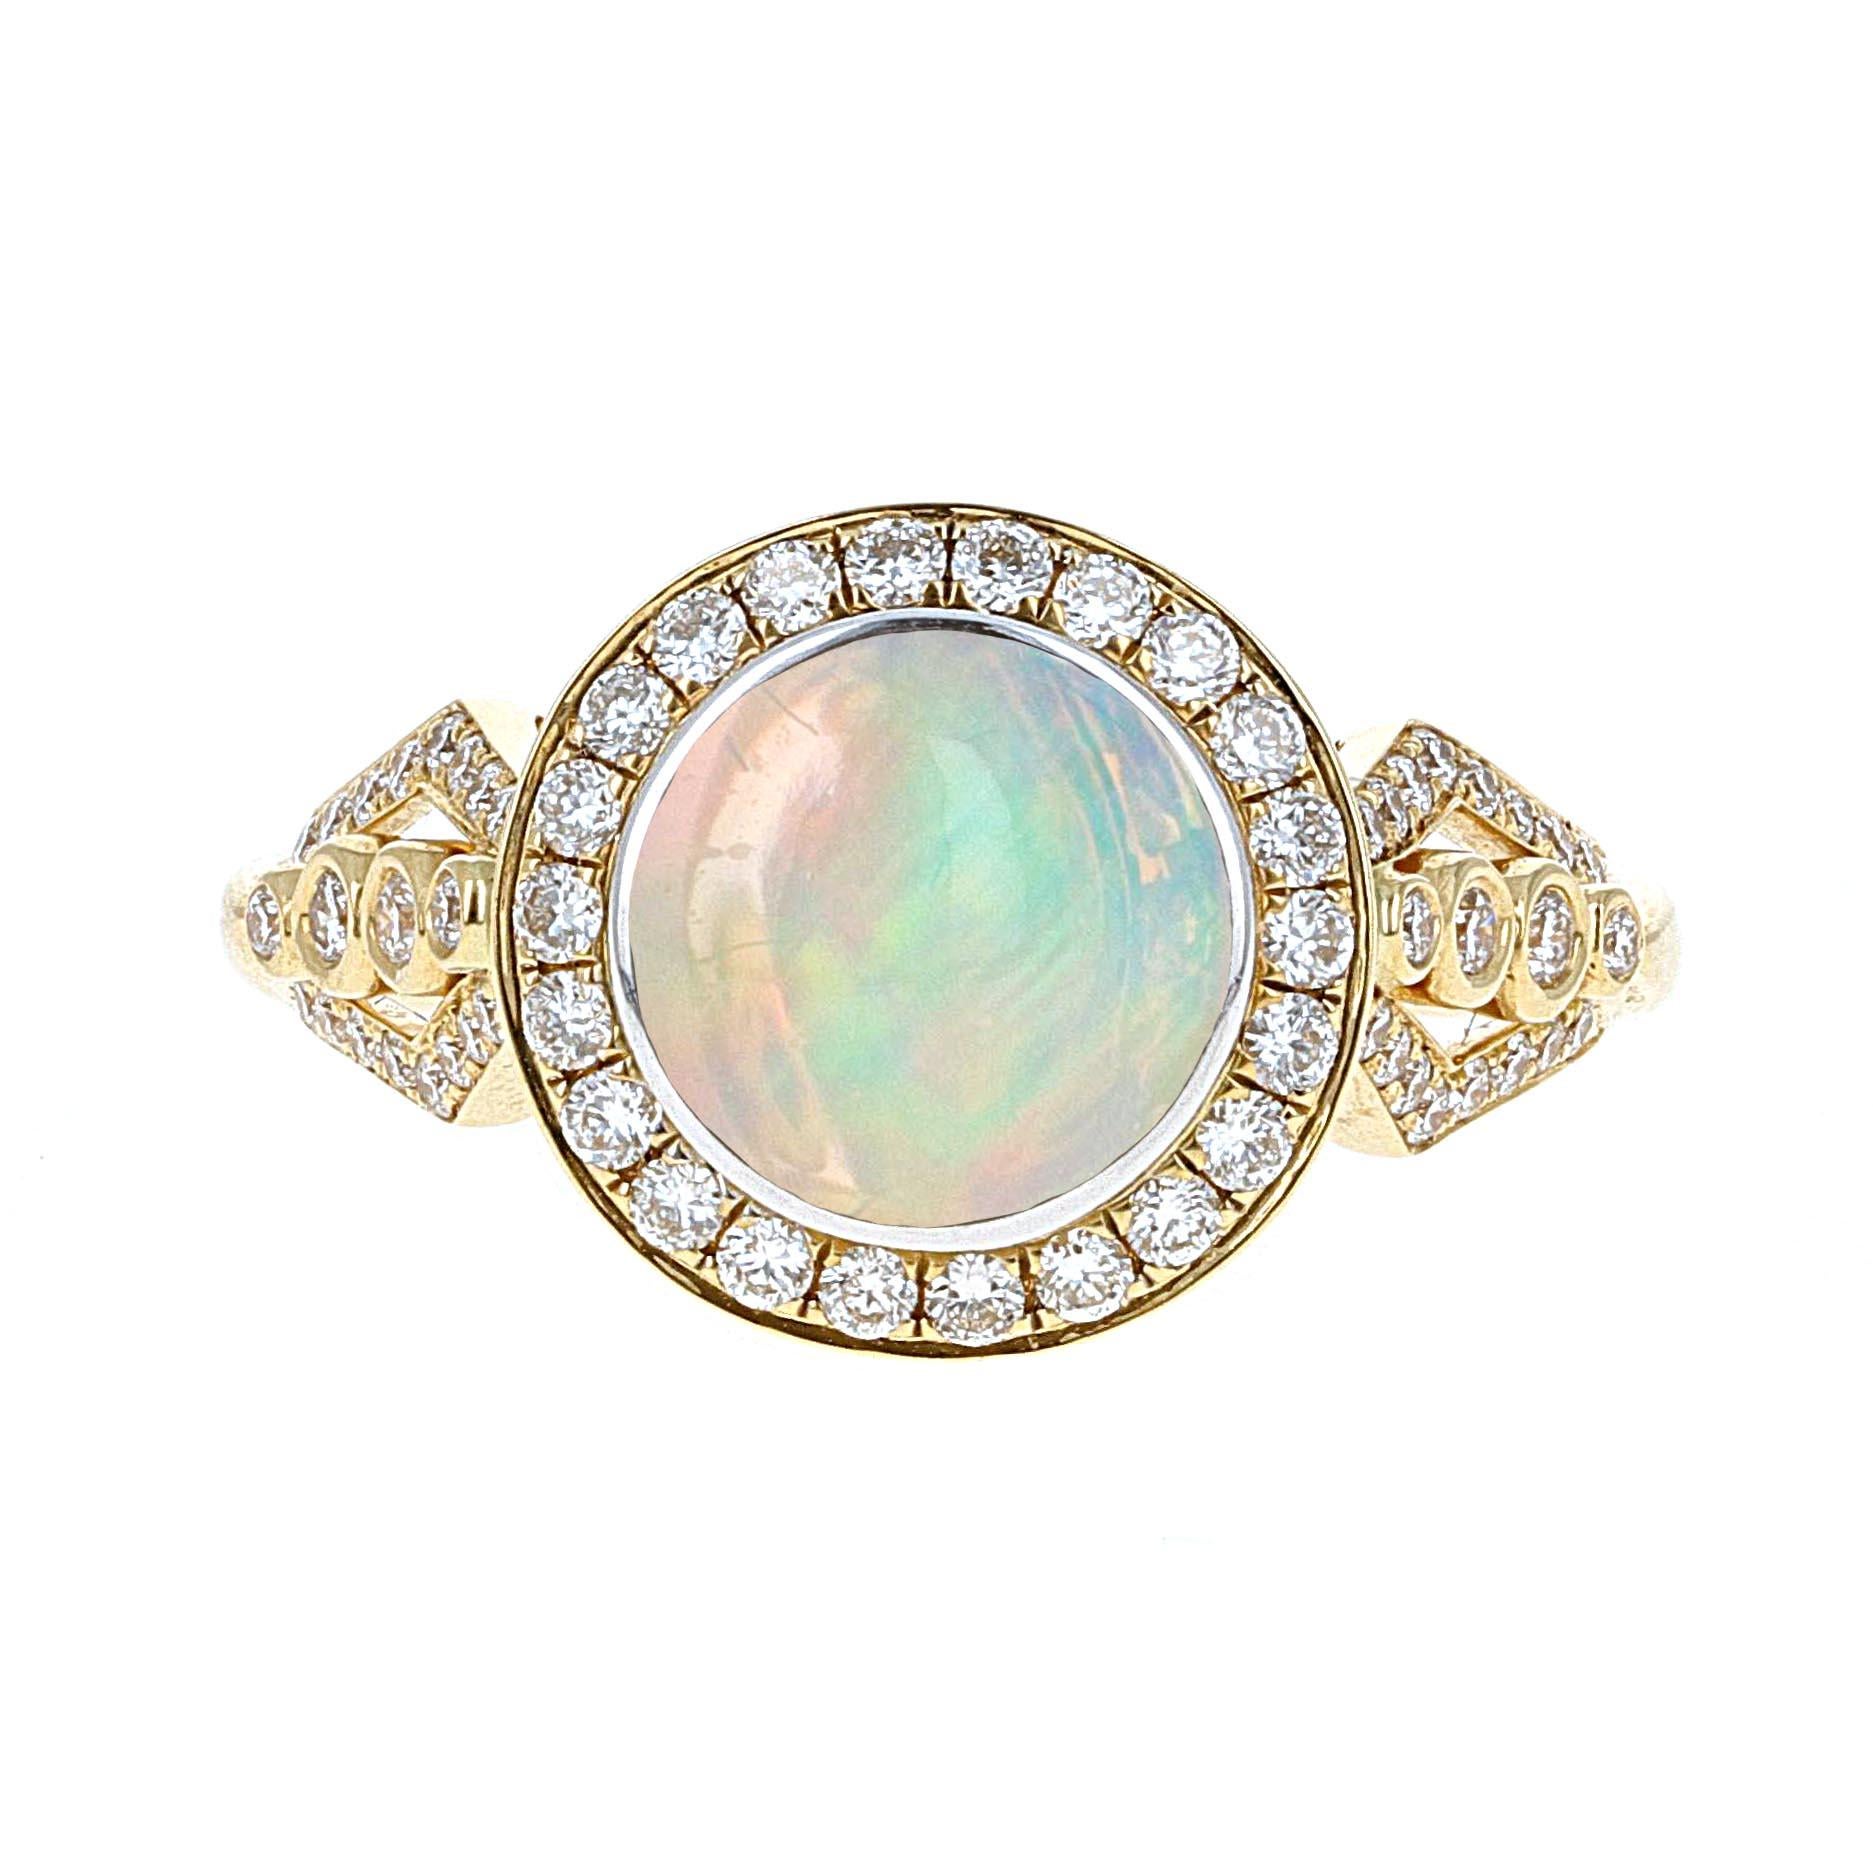 Beautifully hand made, Philip Zahm Designs, Mexican fire opal and diamond cocktail ring. The fire opal weighs 2.16 carats. The ring is made in 18 karat yellow gold and has 0.51 carats total weight in diamonds.
